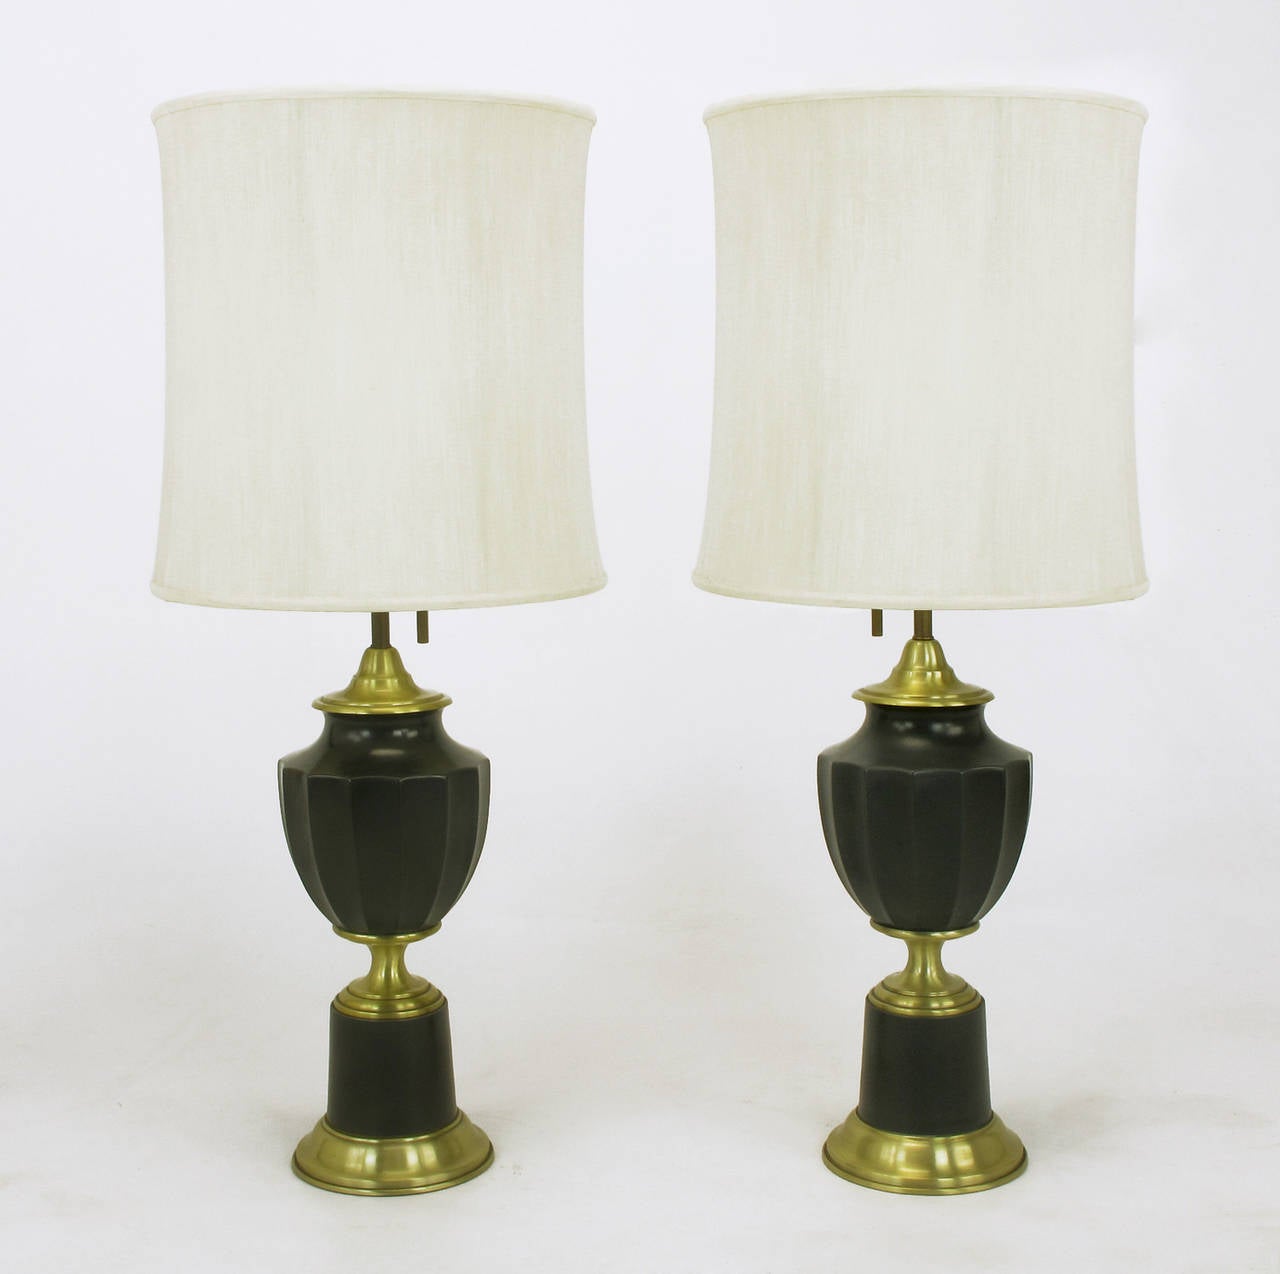 Elegant pair of neoclassical table lamps from Lightolier with spun brass caps, risers and base. Also, dark green lacquered metal fluted urn body and cylindrical pedestal appear as stone. Lightolier three way socket housing in white lacquer with